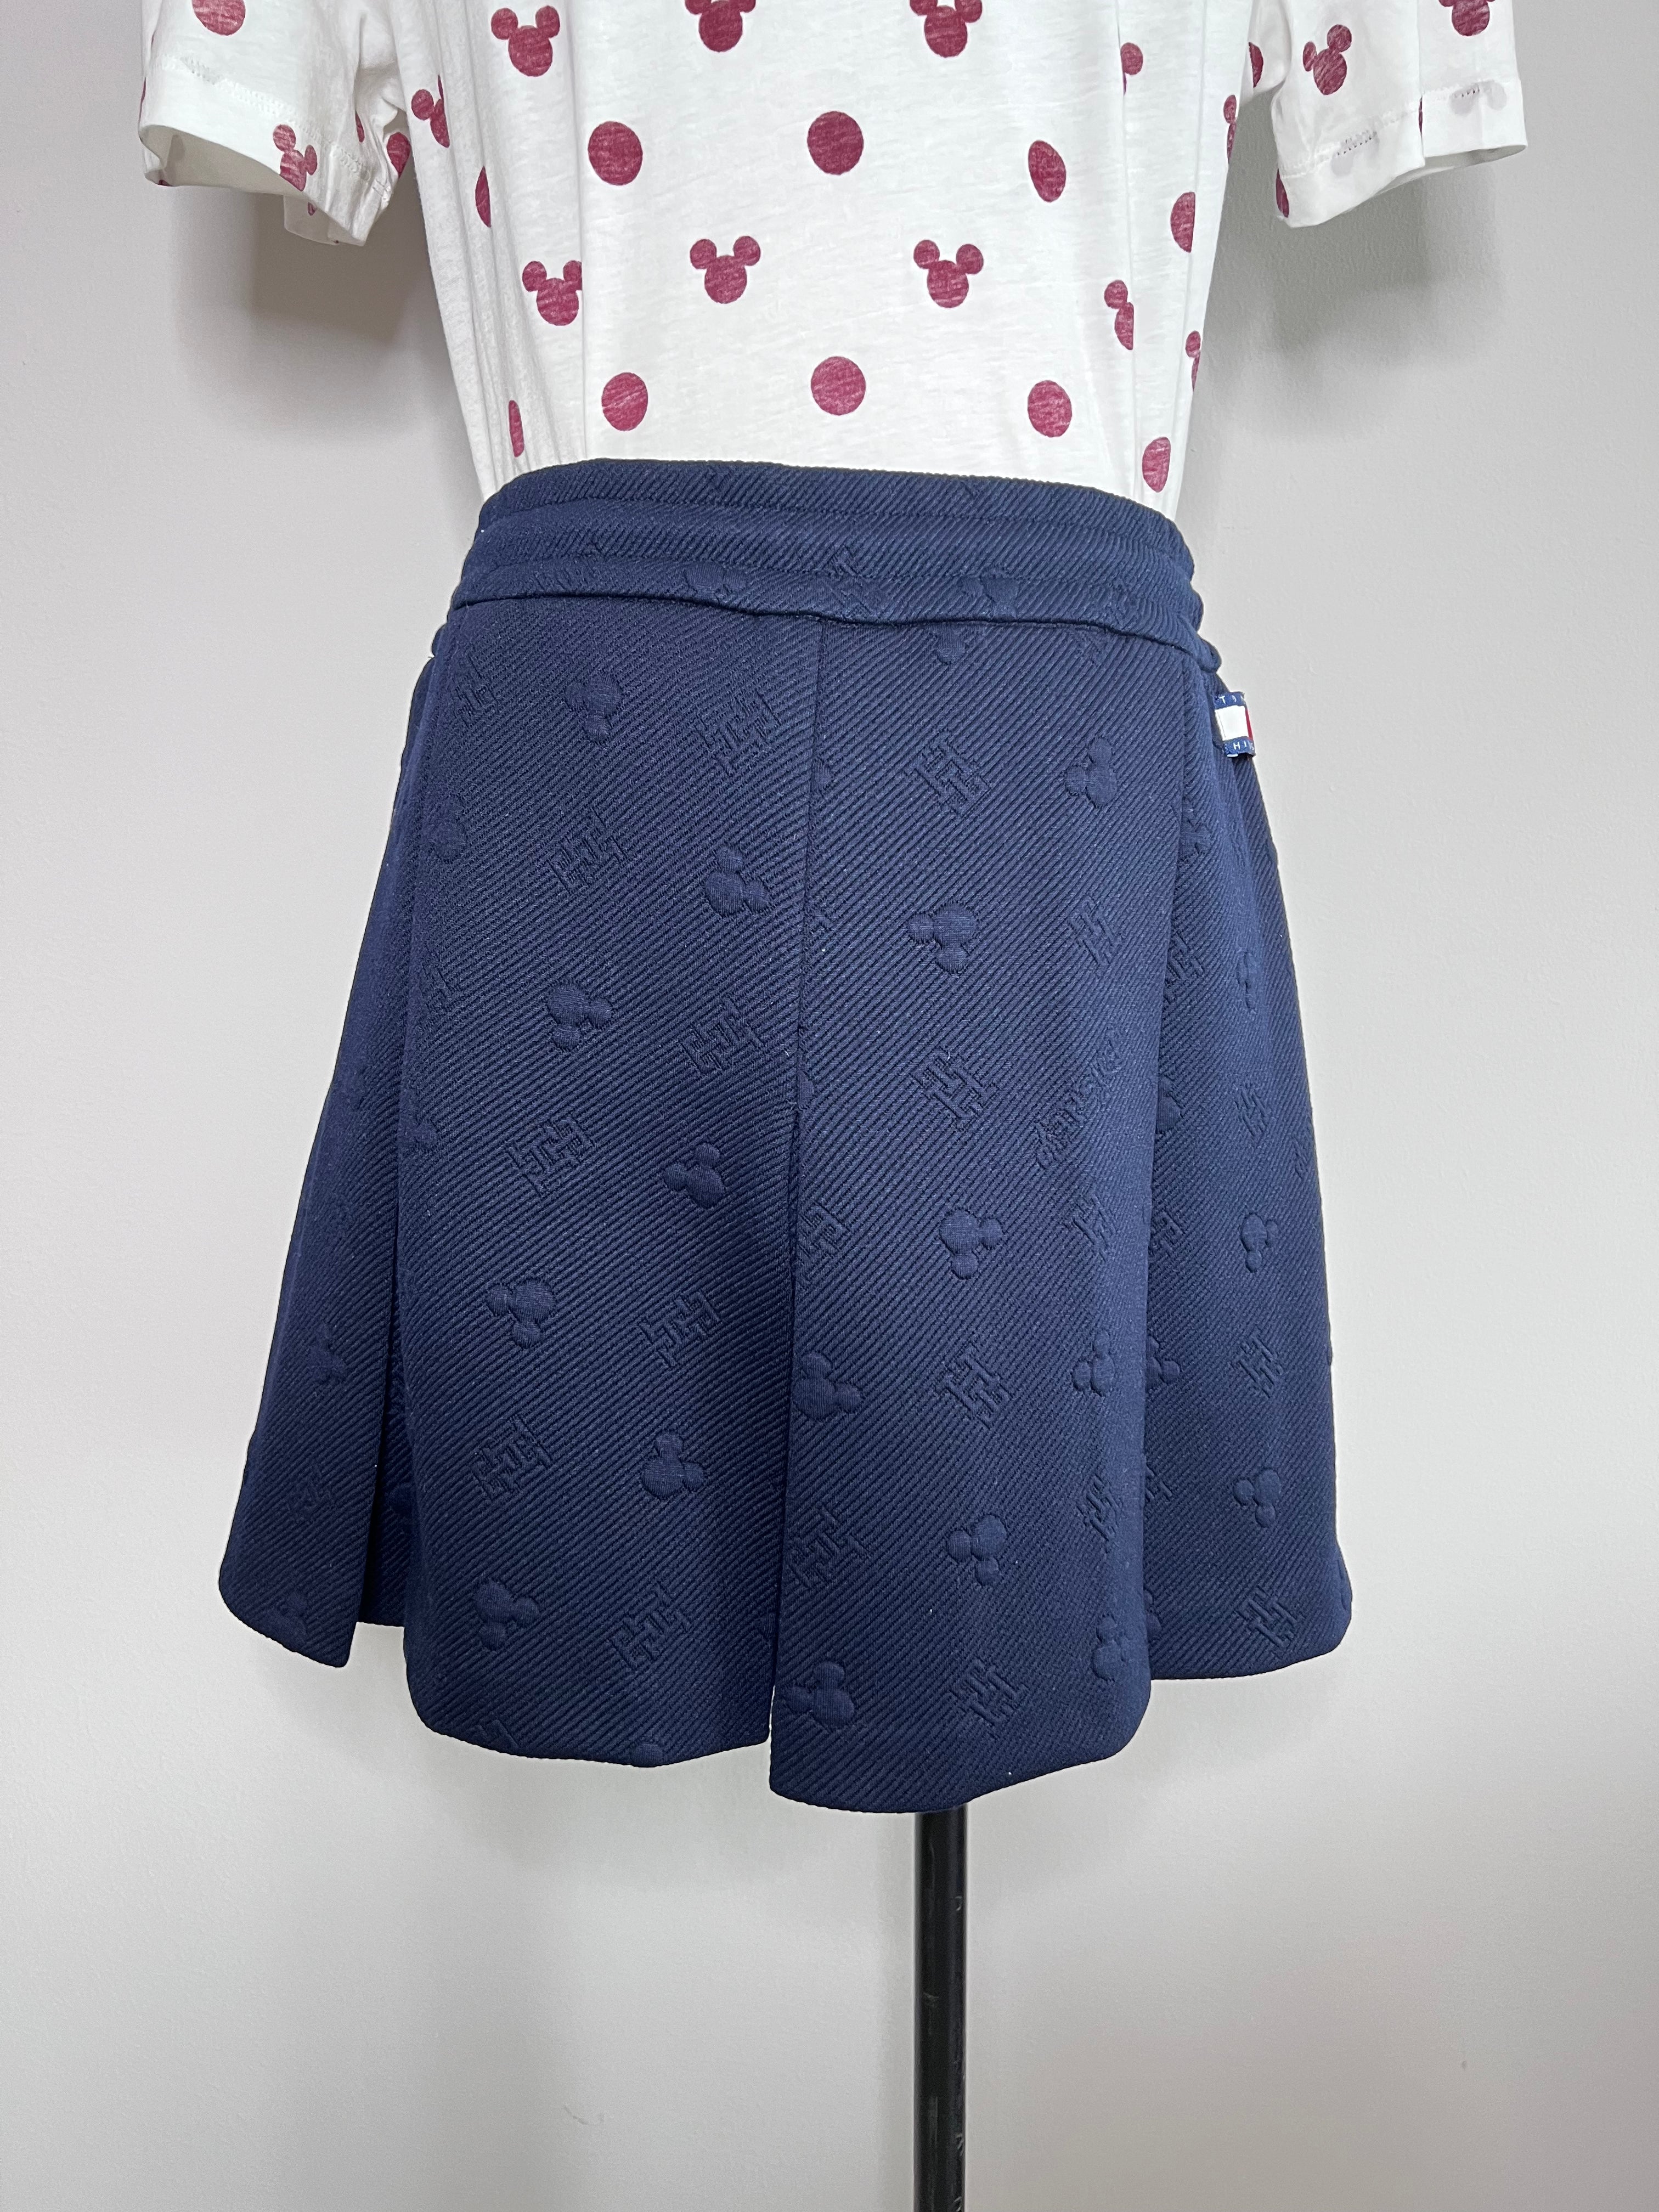 Mickey Mouse icon print pledged style skirt in navy blue - TOMMY HILFIGER